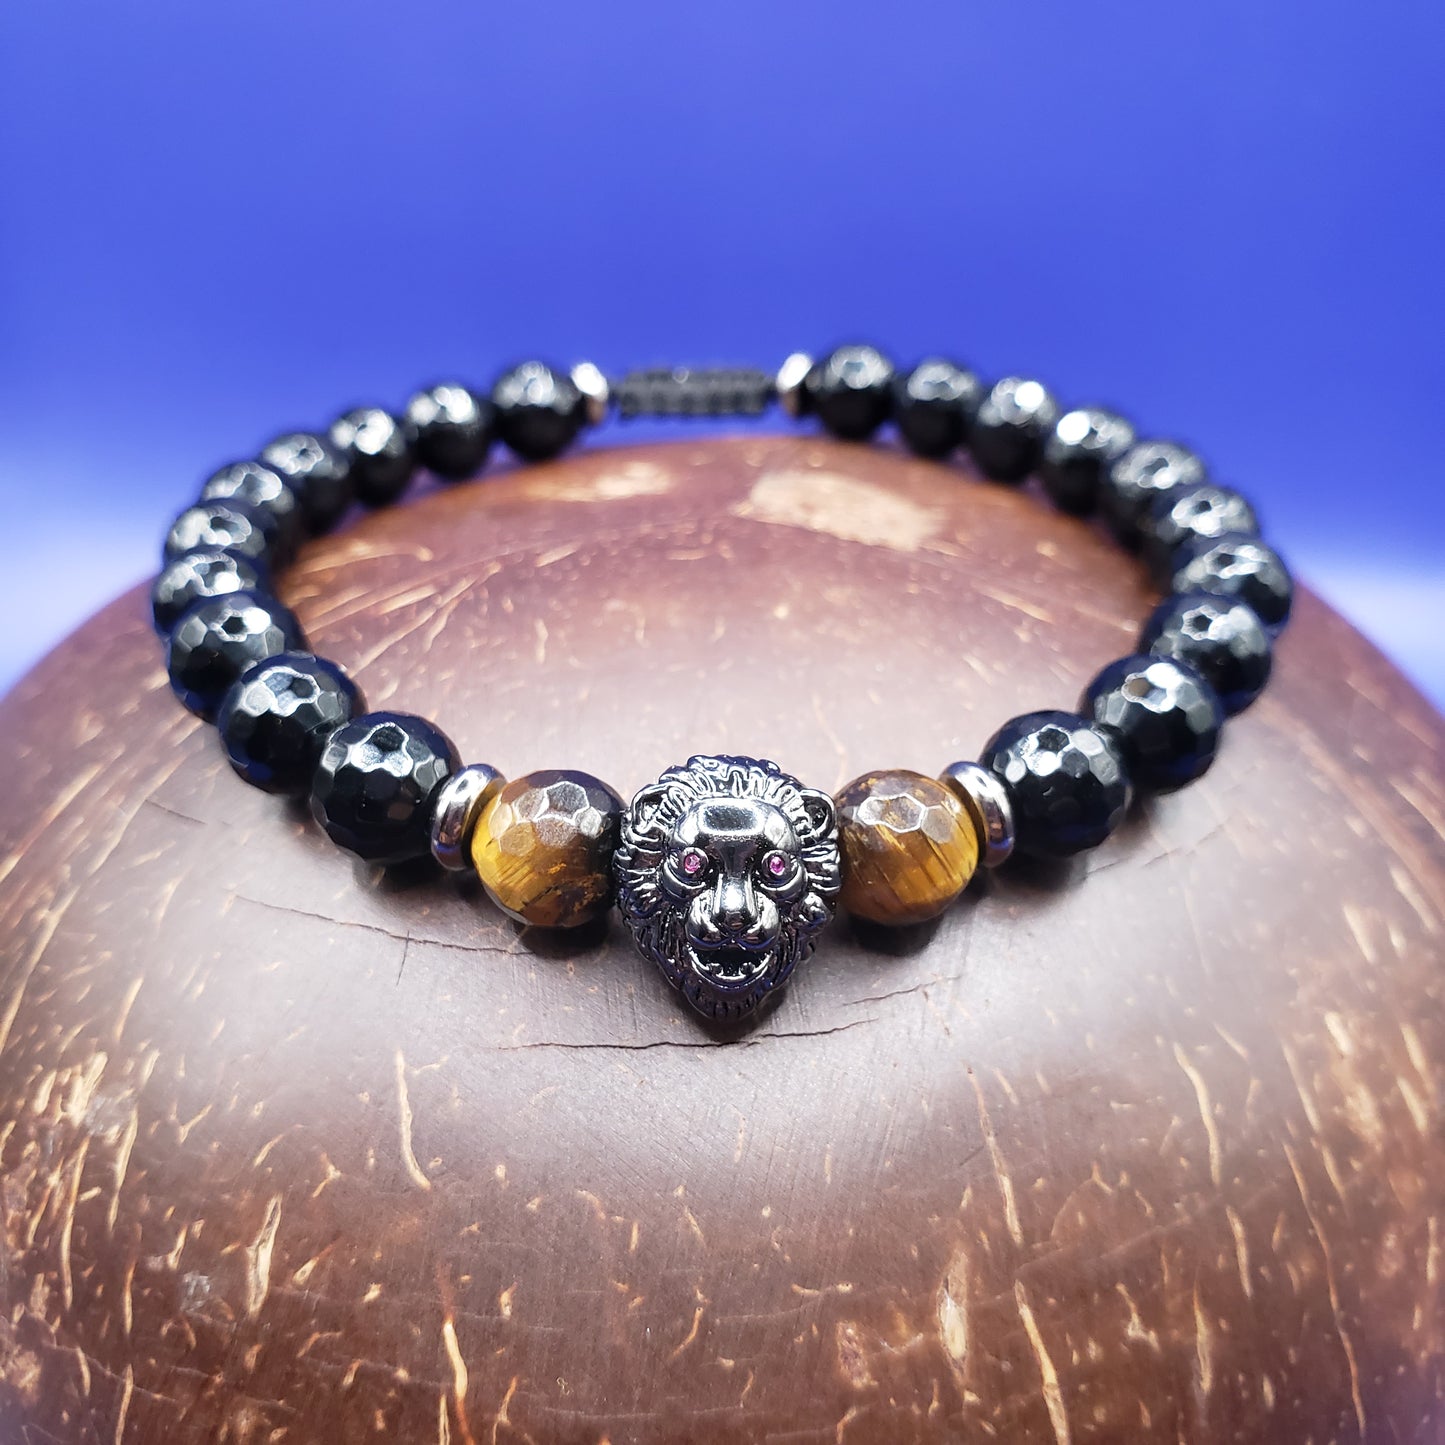 Faceted Onyx and Tiger's Eye Bracelet with Lion's Head Charm